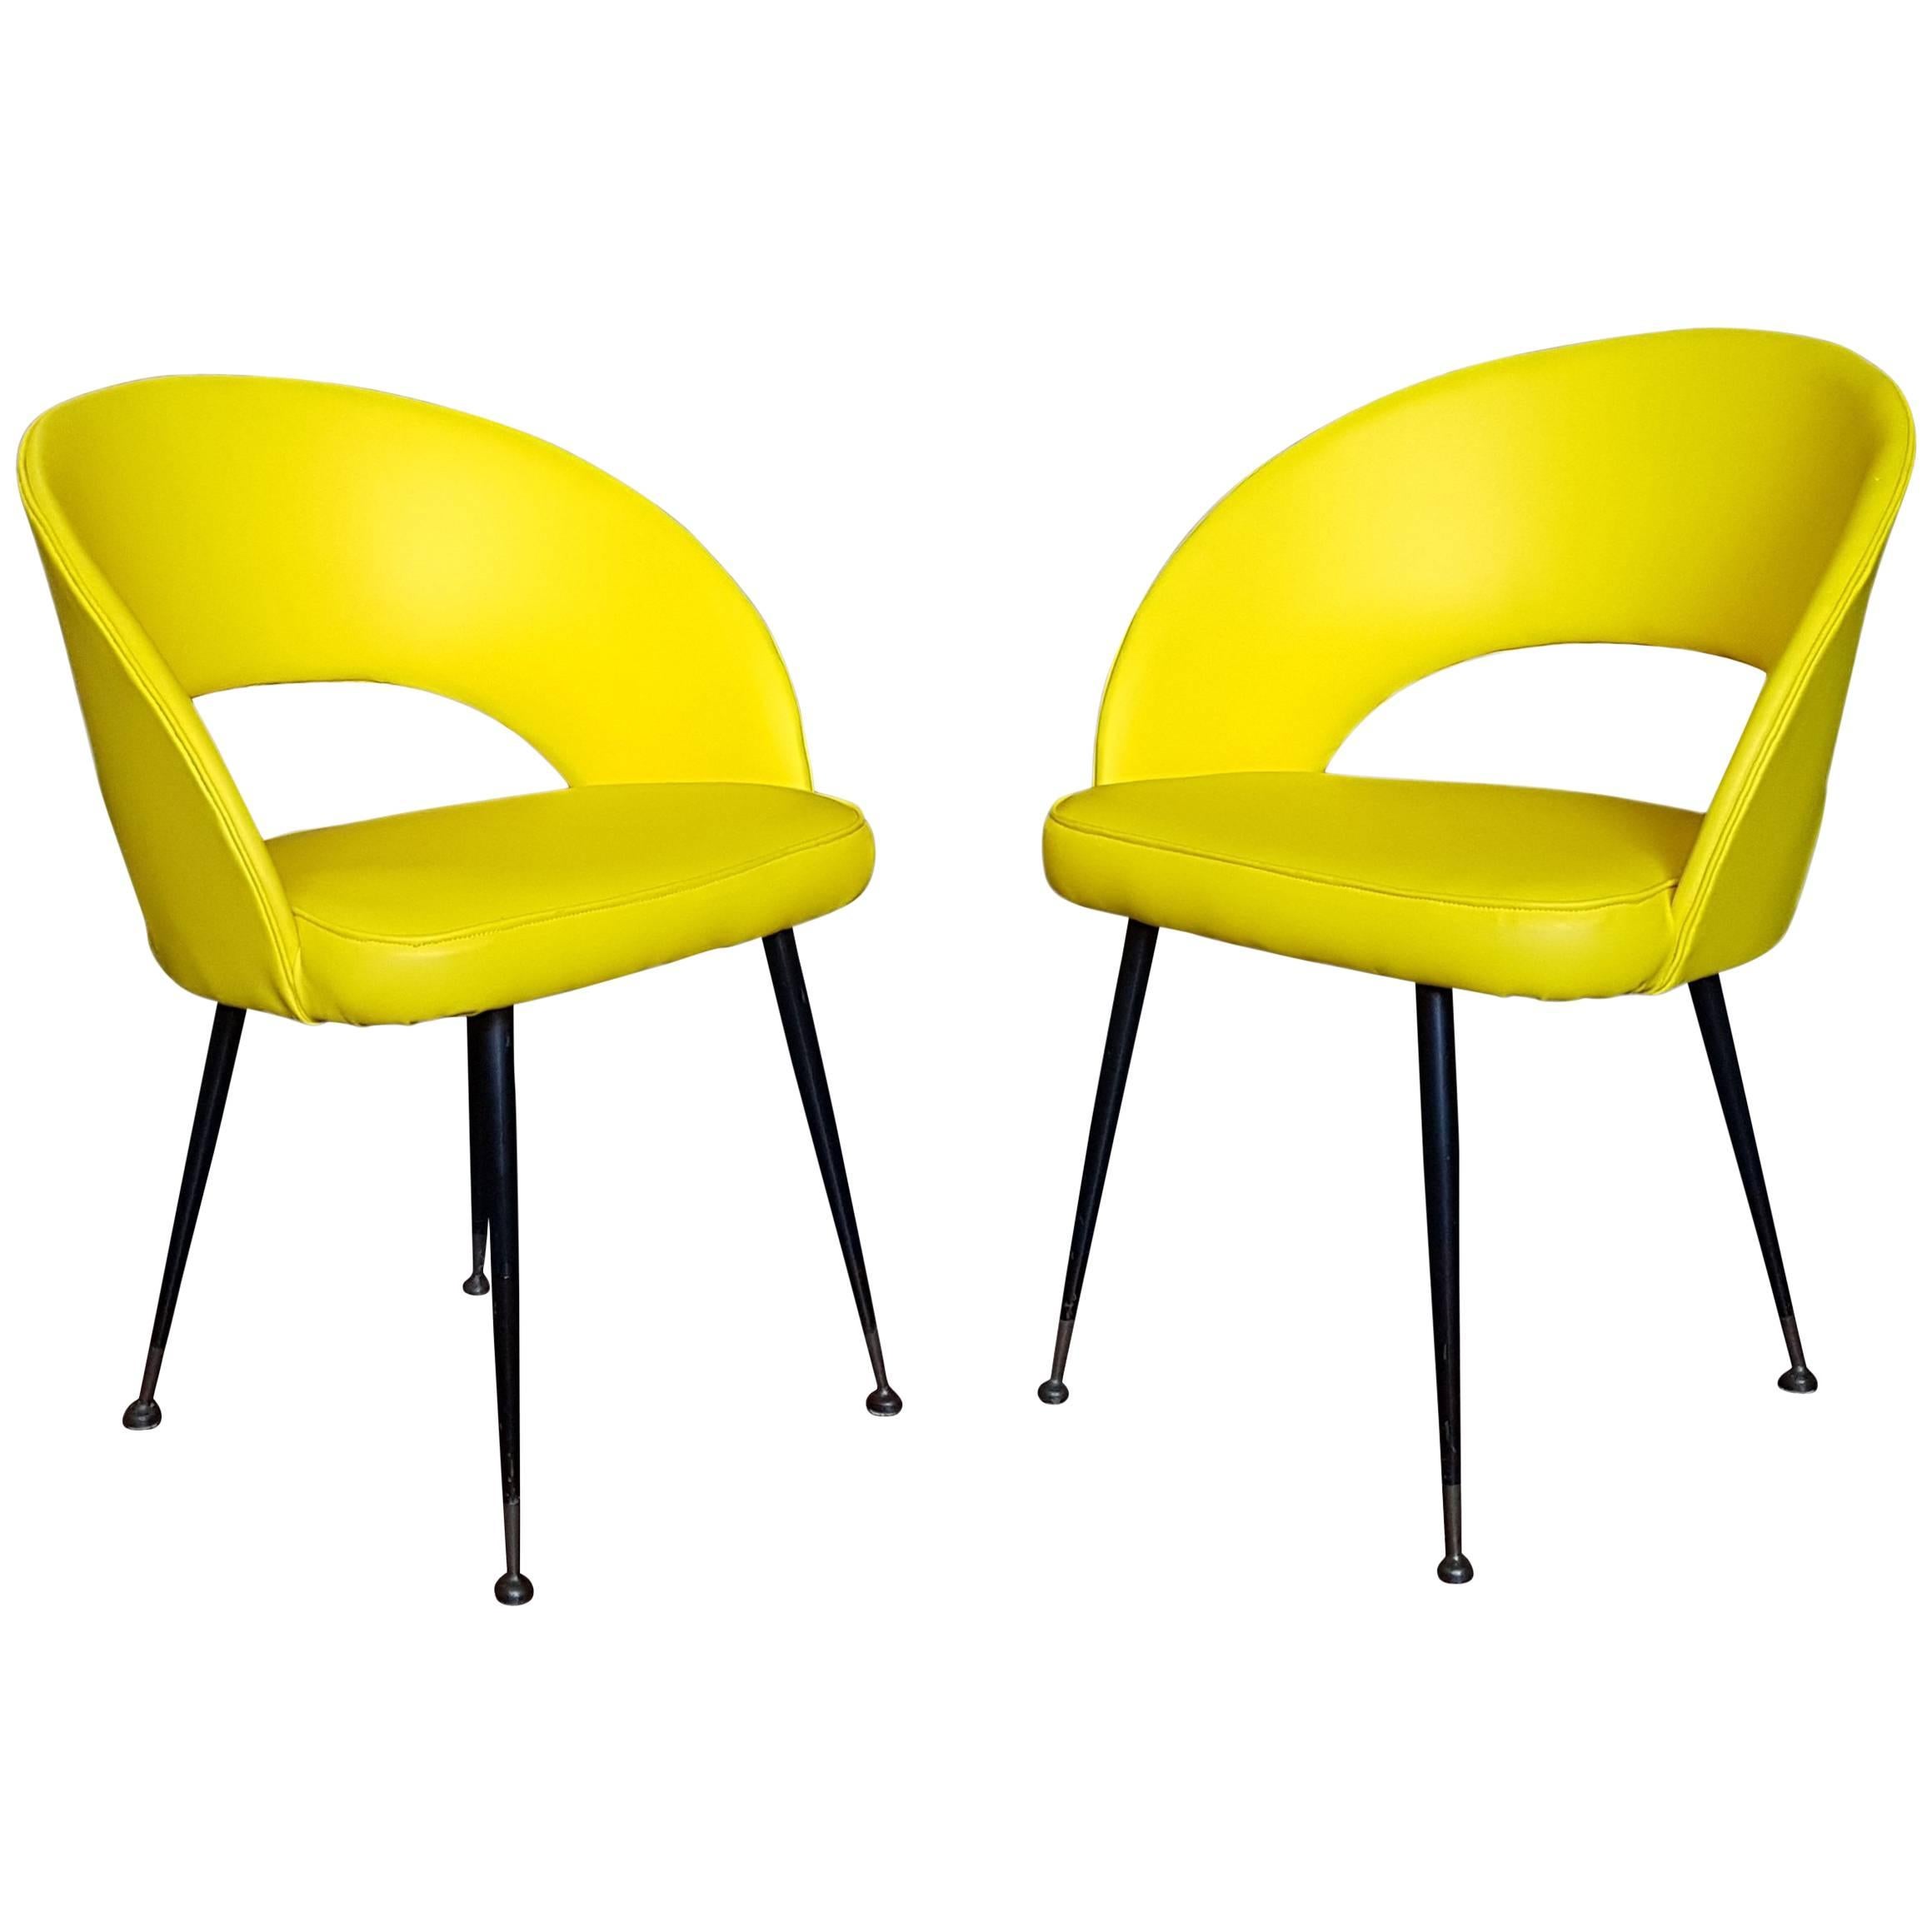 1950s Pair of Yellow Armchairs For Sale